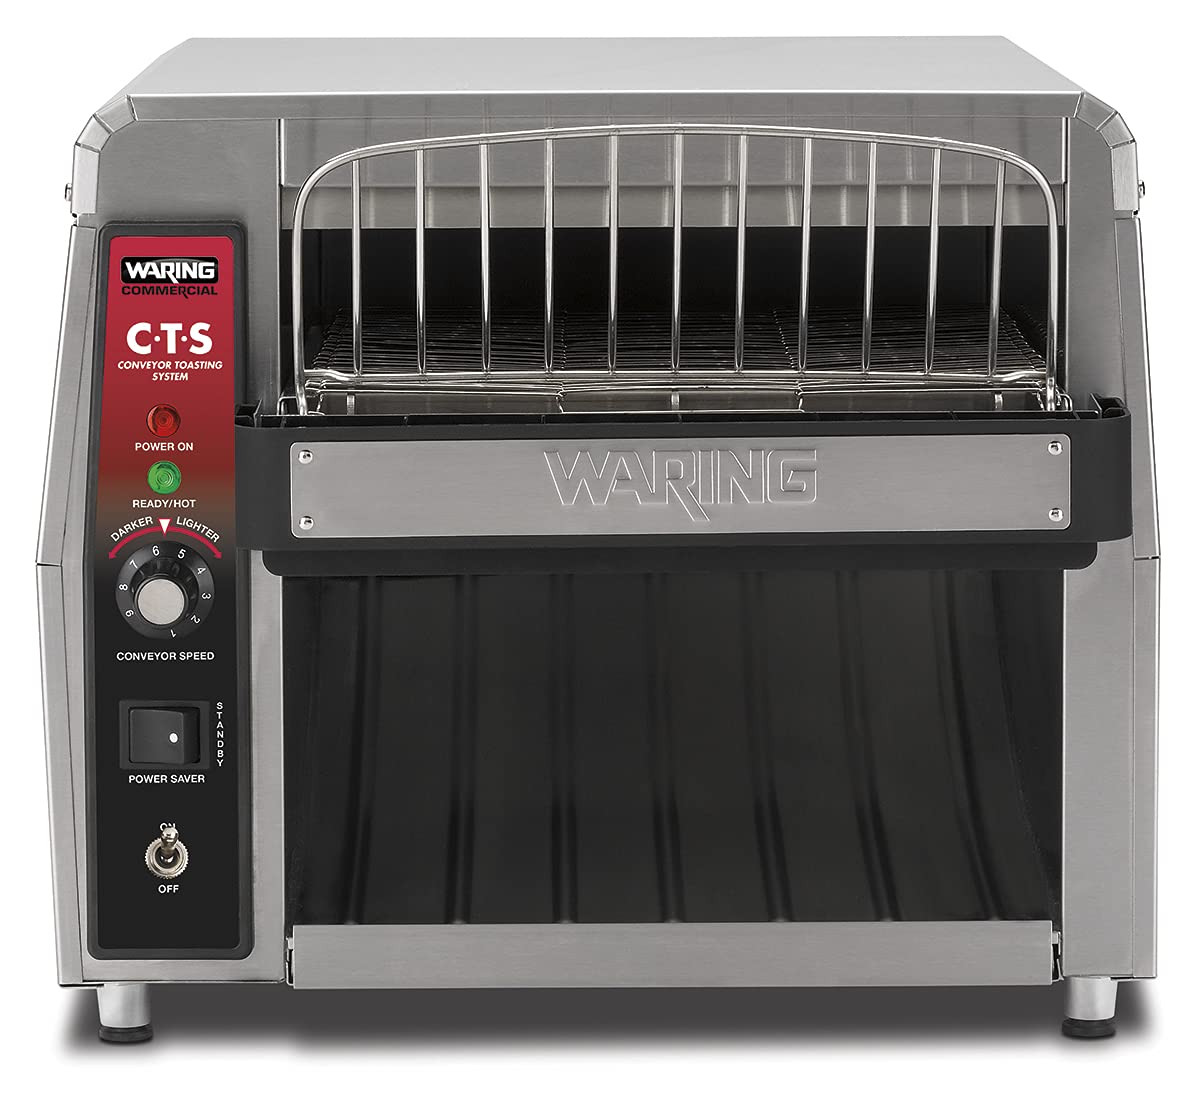 Waring Commercial CTS1000 Conveyor Toaster